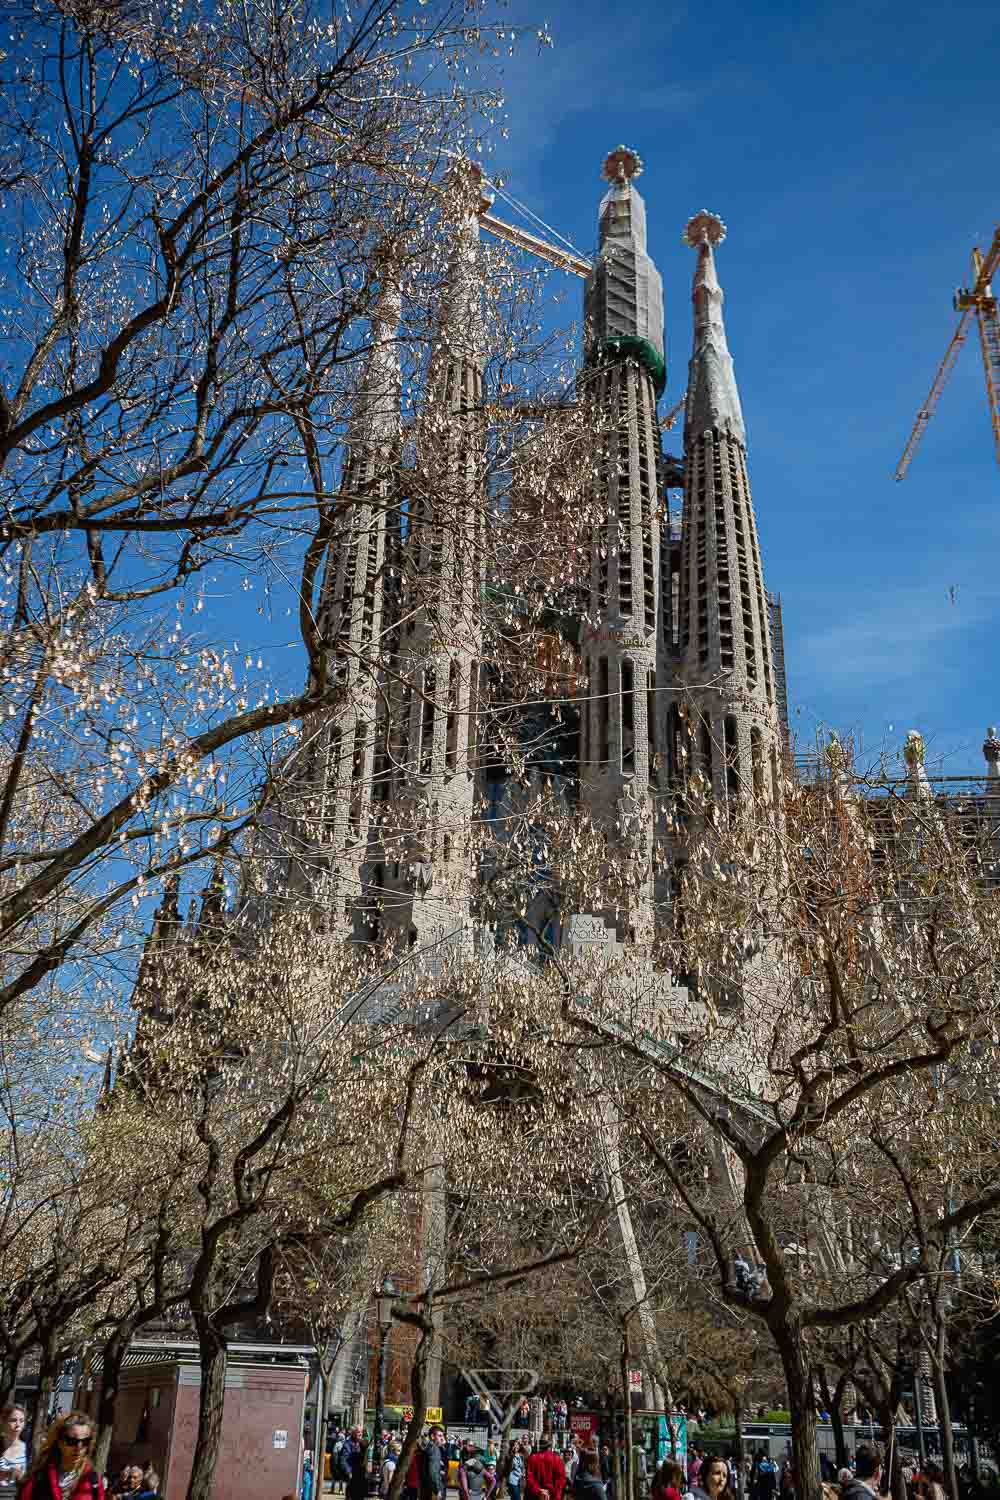 Barcelona - Sagrada Familia church - view & tips for visiting the church and basilica - Top sightseeing in Barcelona, the Sagrada Familia. Entrance fees and opening hours, views from the towers and tips for visiting - Basílica i Temple Expiatori de la Sagrada Família - How much does it cost to climb the tower? Which tower is better? When is the Sagrada open? Is it worth a visit to Barcelona? Barcelona sightseeing and top10 tips - Luxury Travel Blog - Travel Blogger Germany